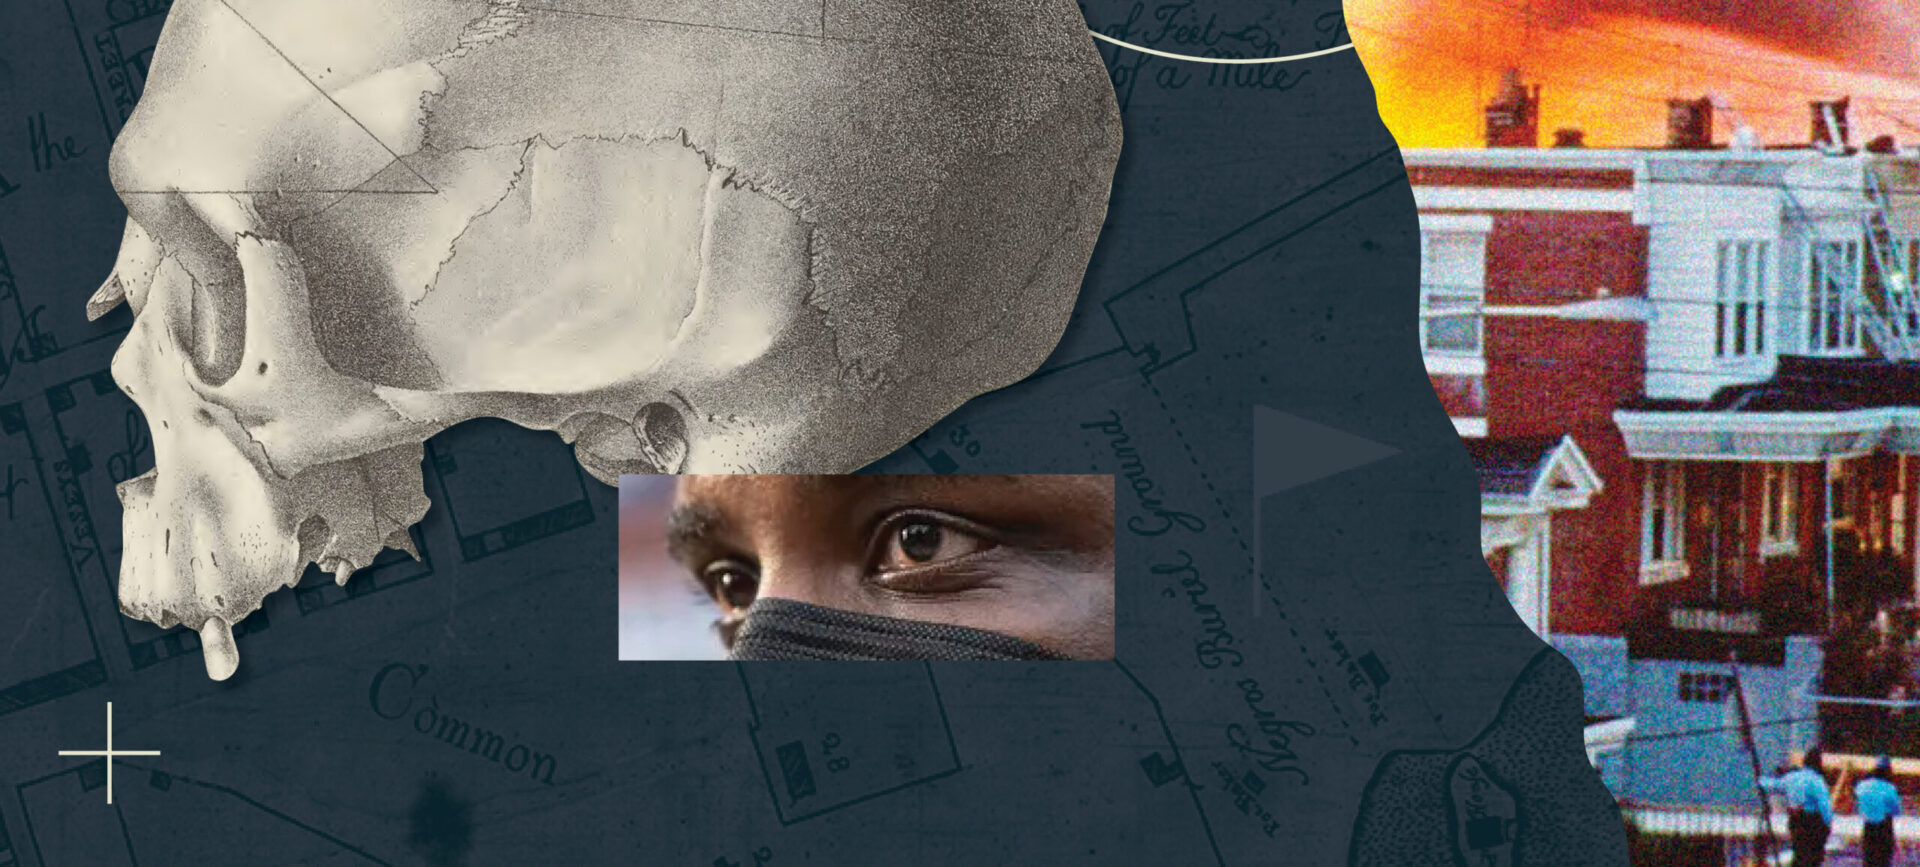 Collage illustration showing map of African Burial Ground in Manhattan, illustration of human skull, man wearing a mask, and a photograph of the MOVE bombing in West Philadelphia